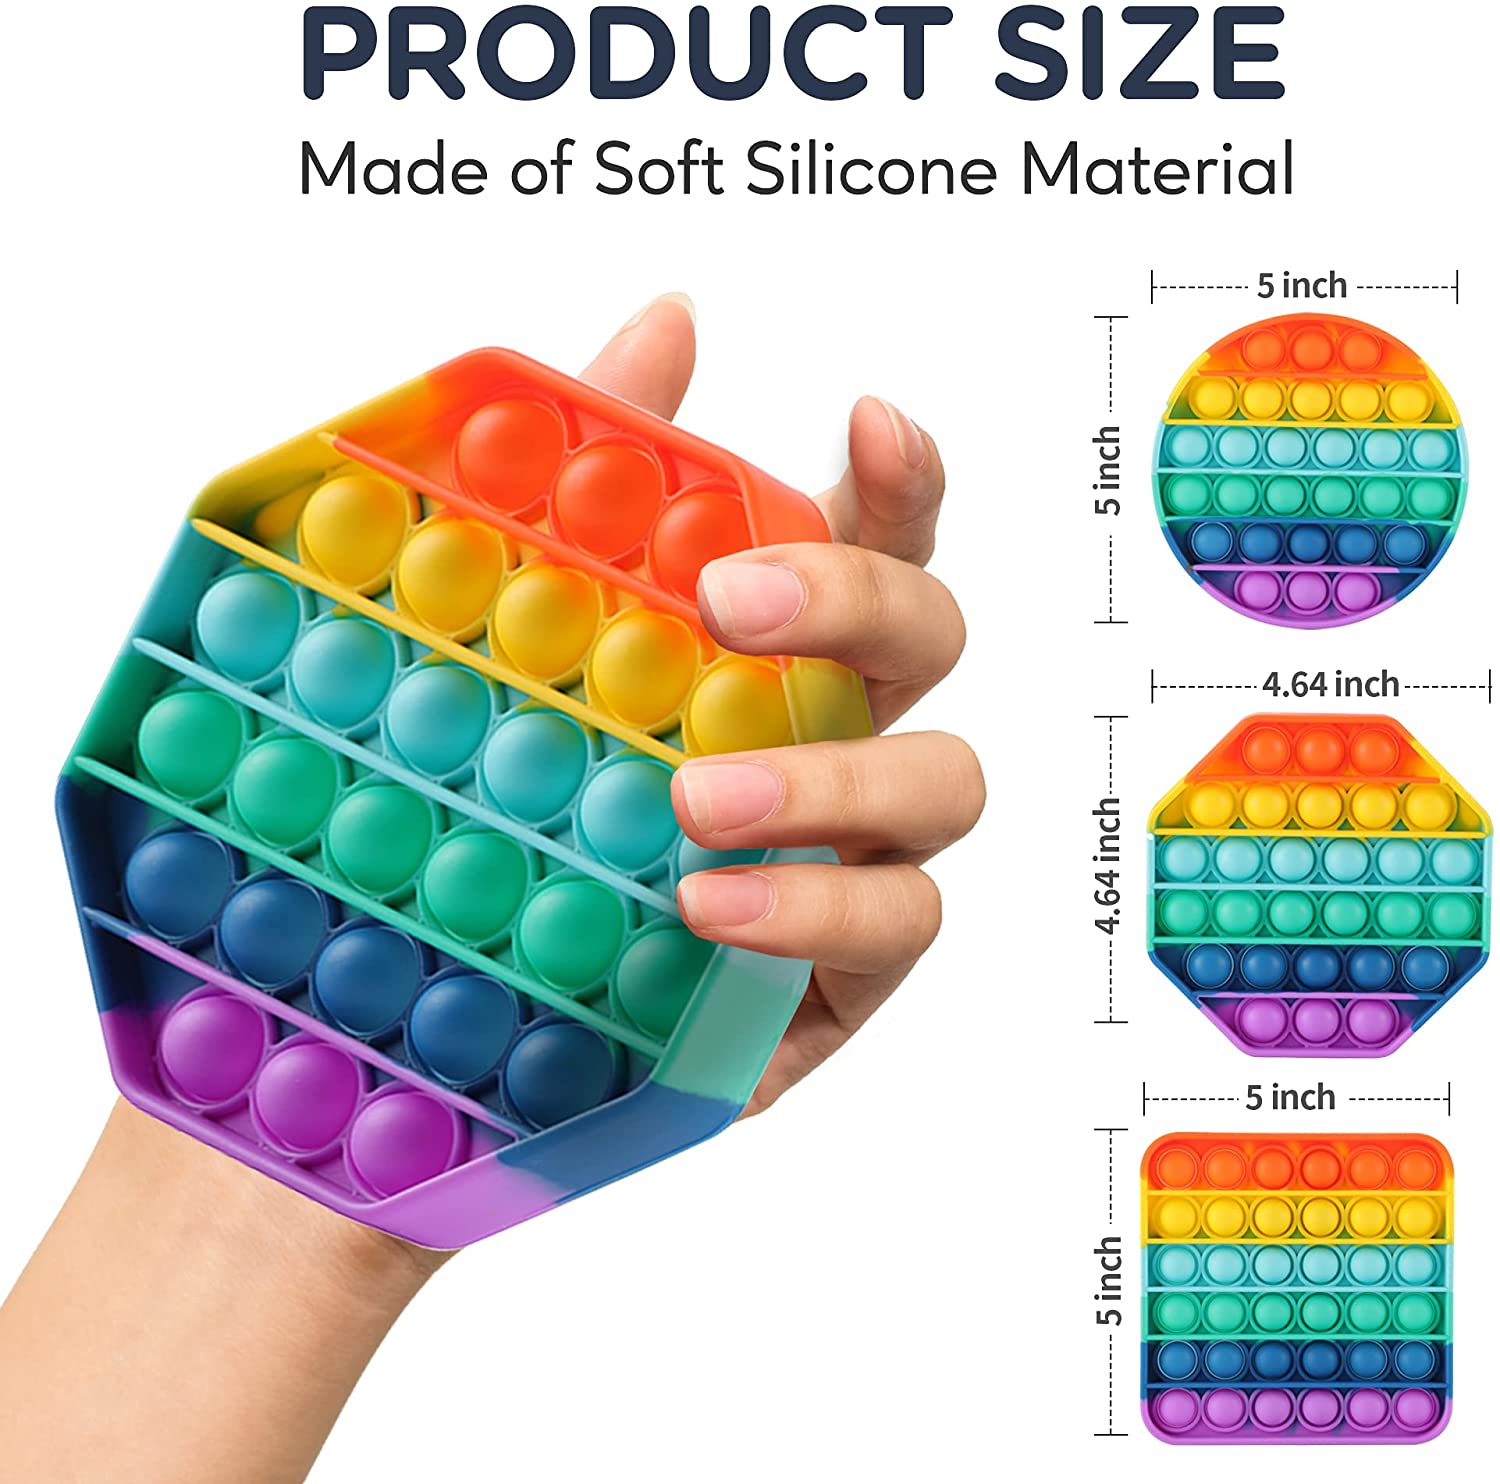 Fidgety and Autism Autistic ADHD 2 Pack ASD WHATOOK Bubble Sensory Fidget pop Toy Silicone Rainbow Cloud Stress Anxiety Restless Reliever Decompression Squeeze Toy for Stressed 